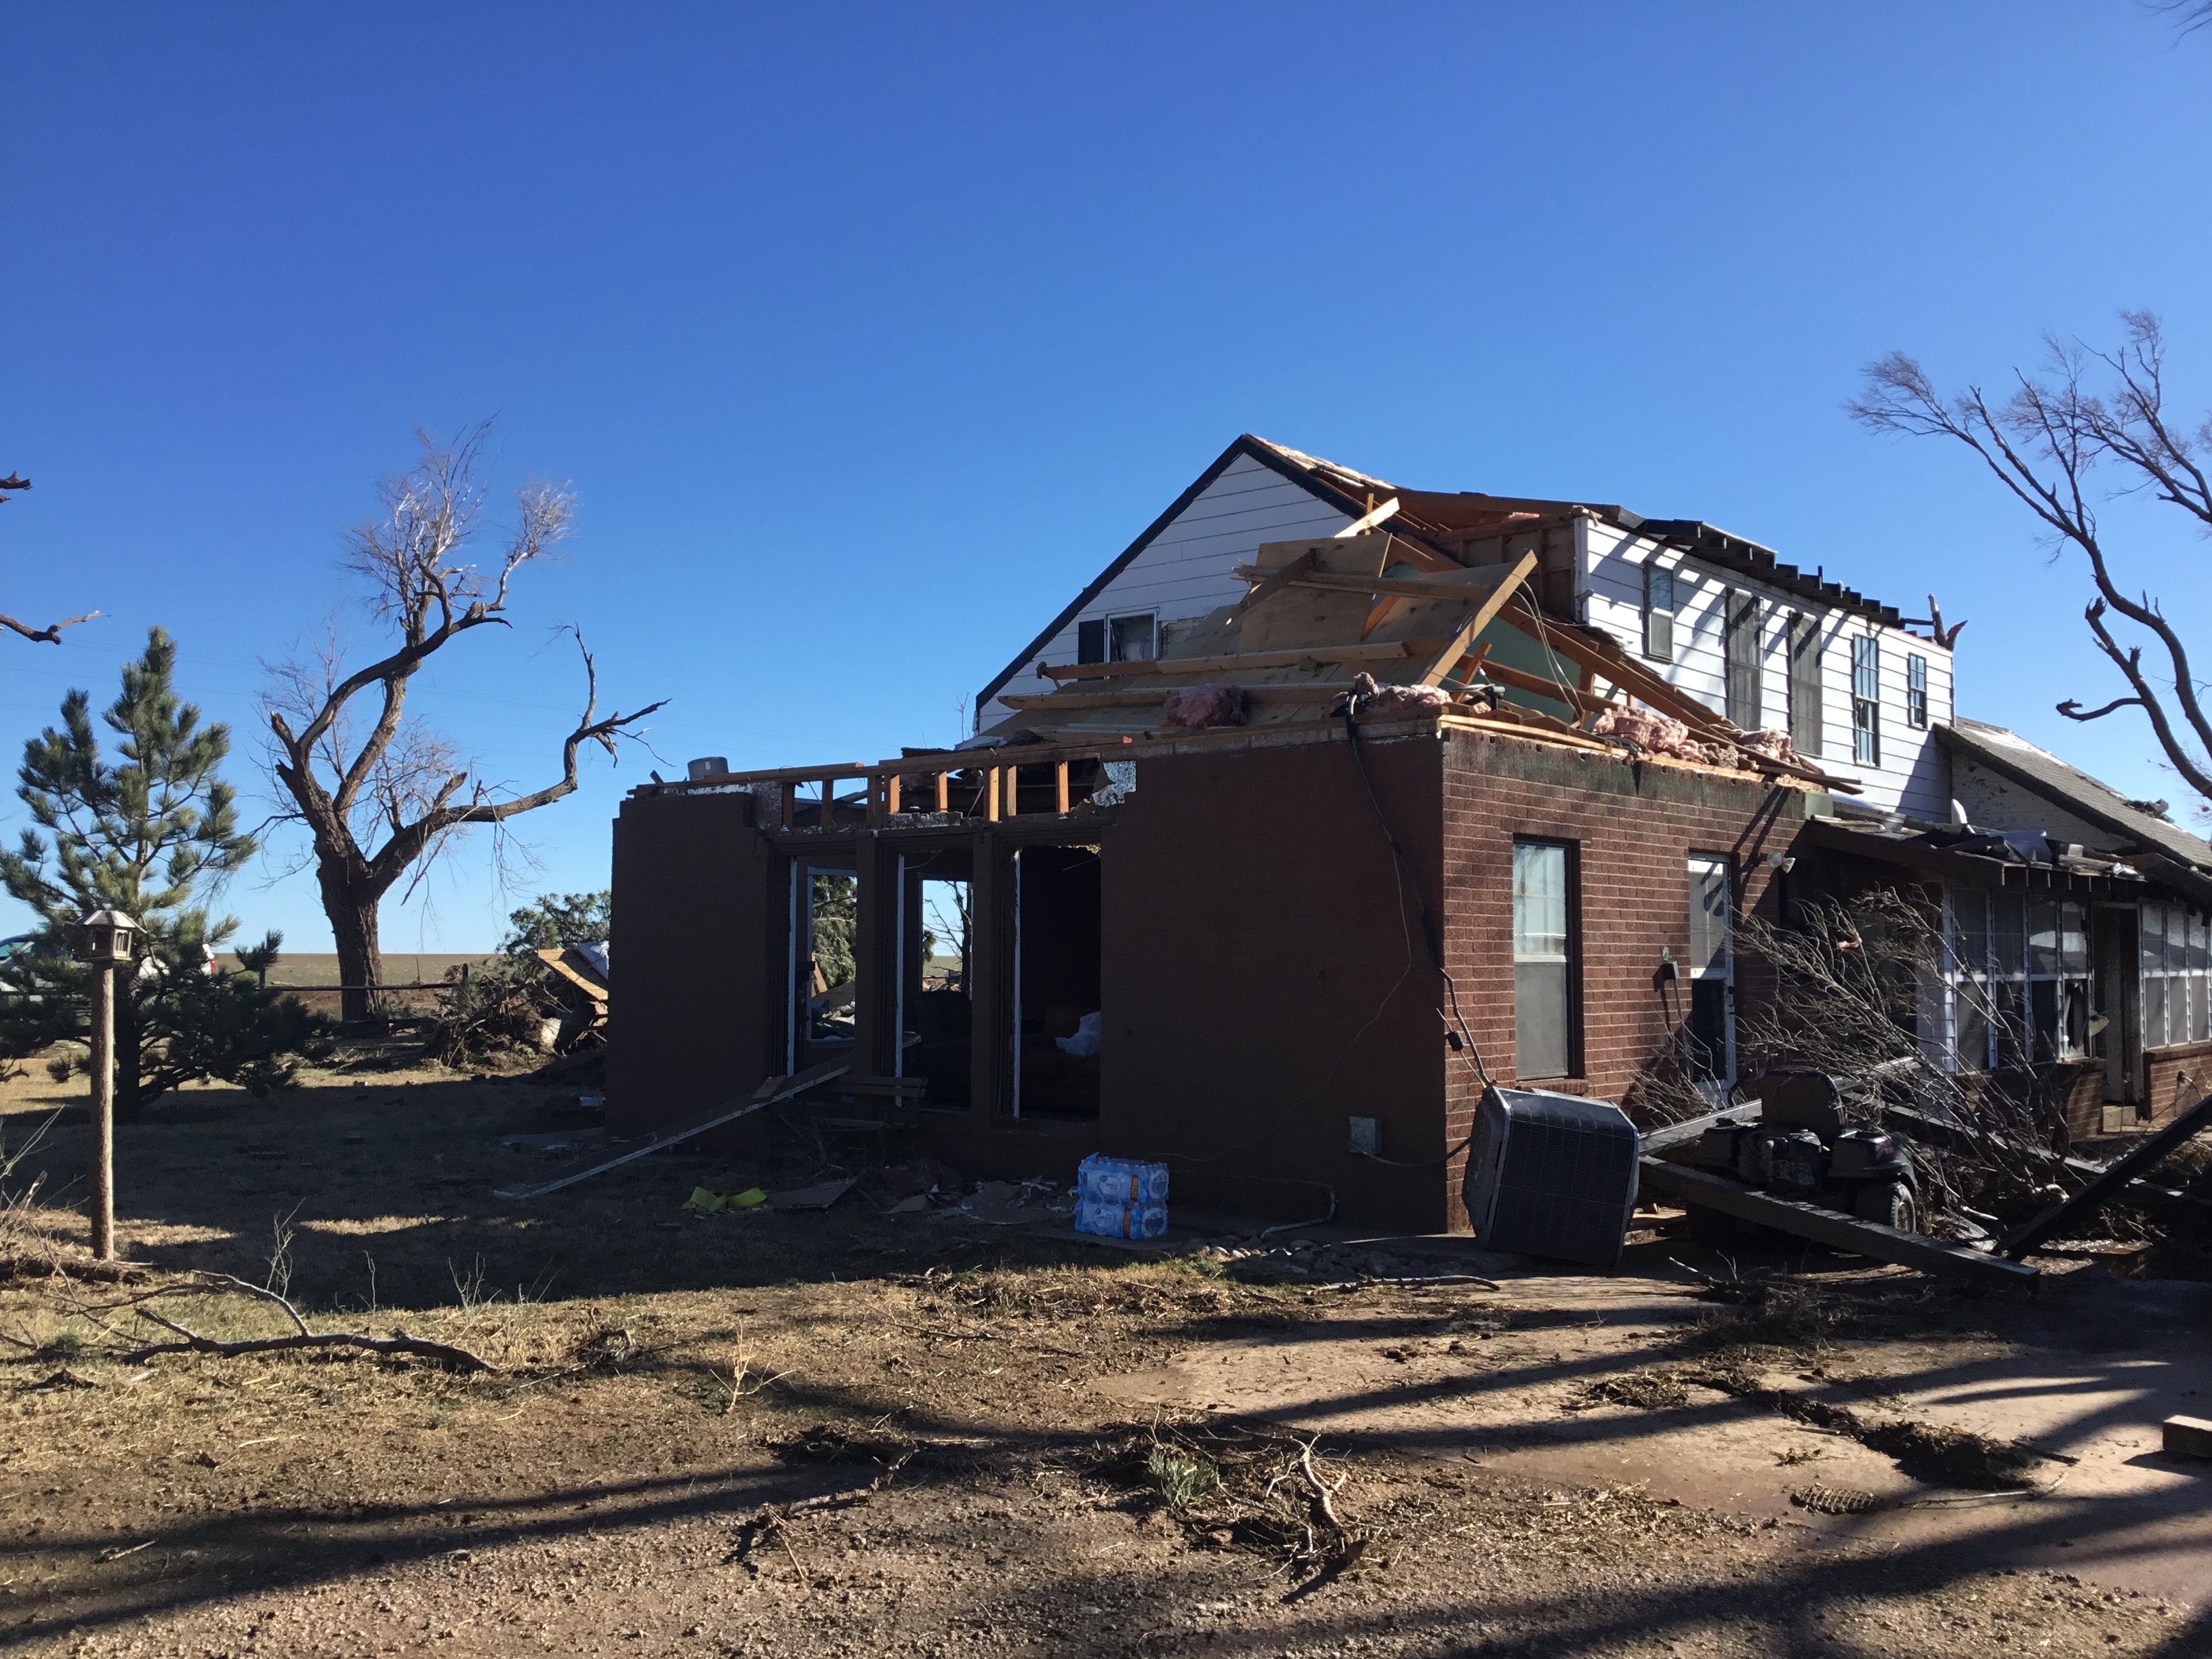 EF2 damage to a home north of Happy, TX